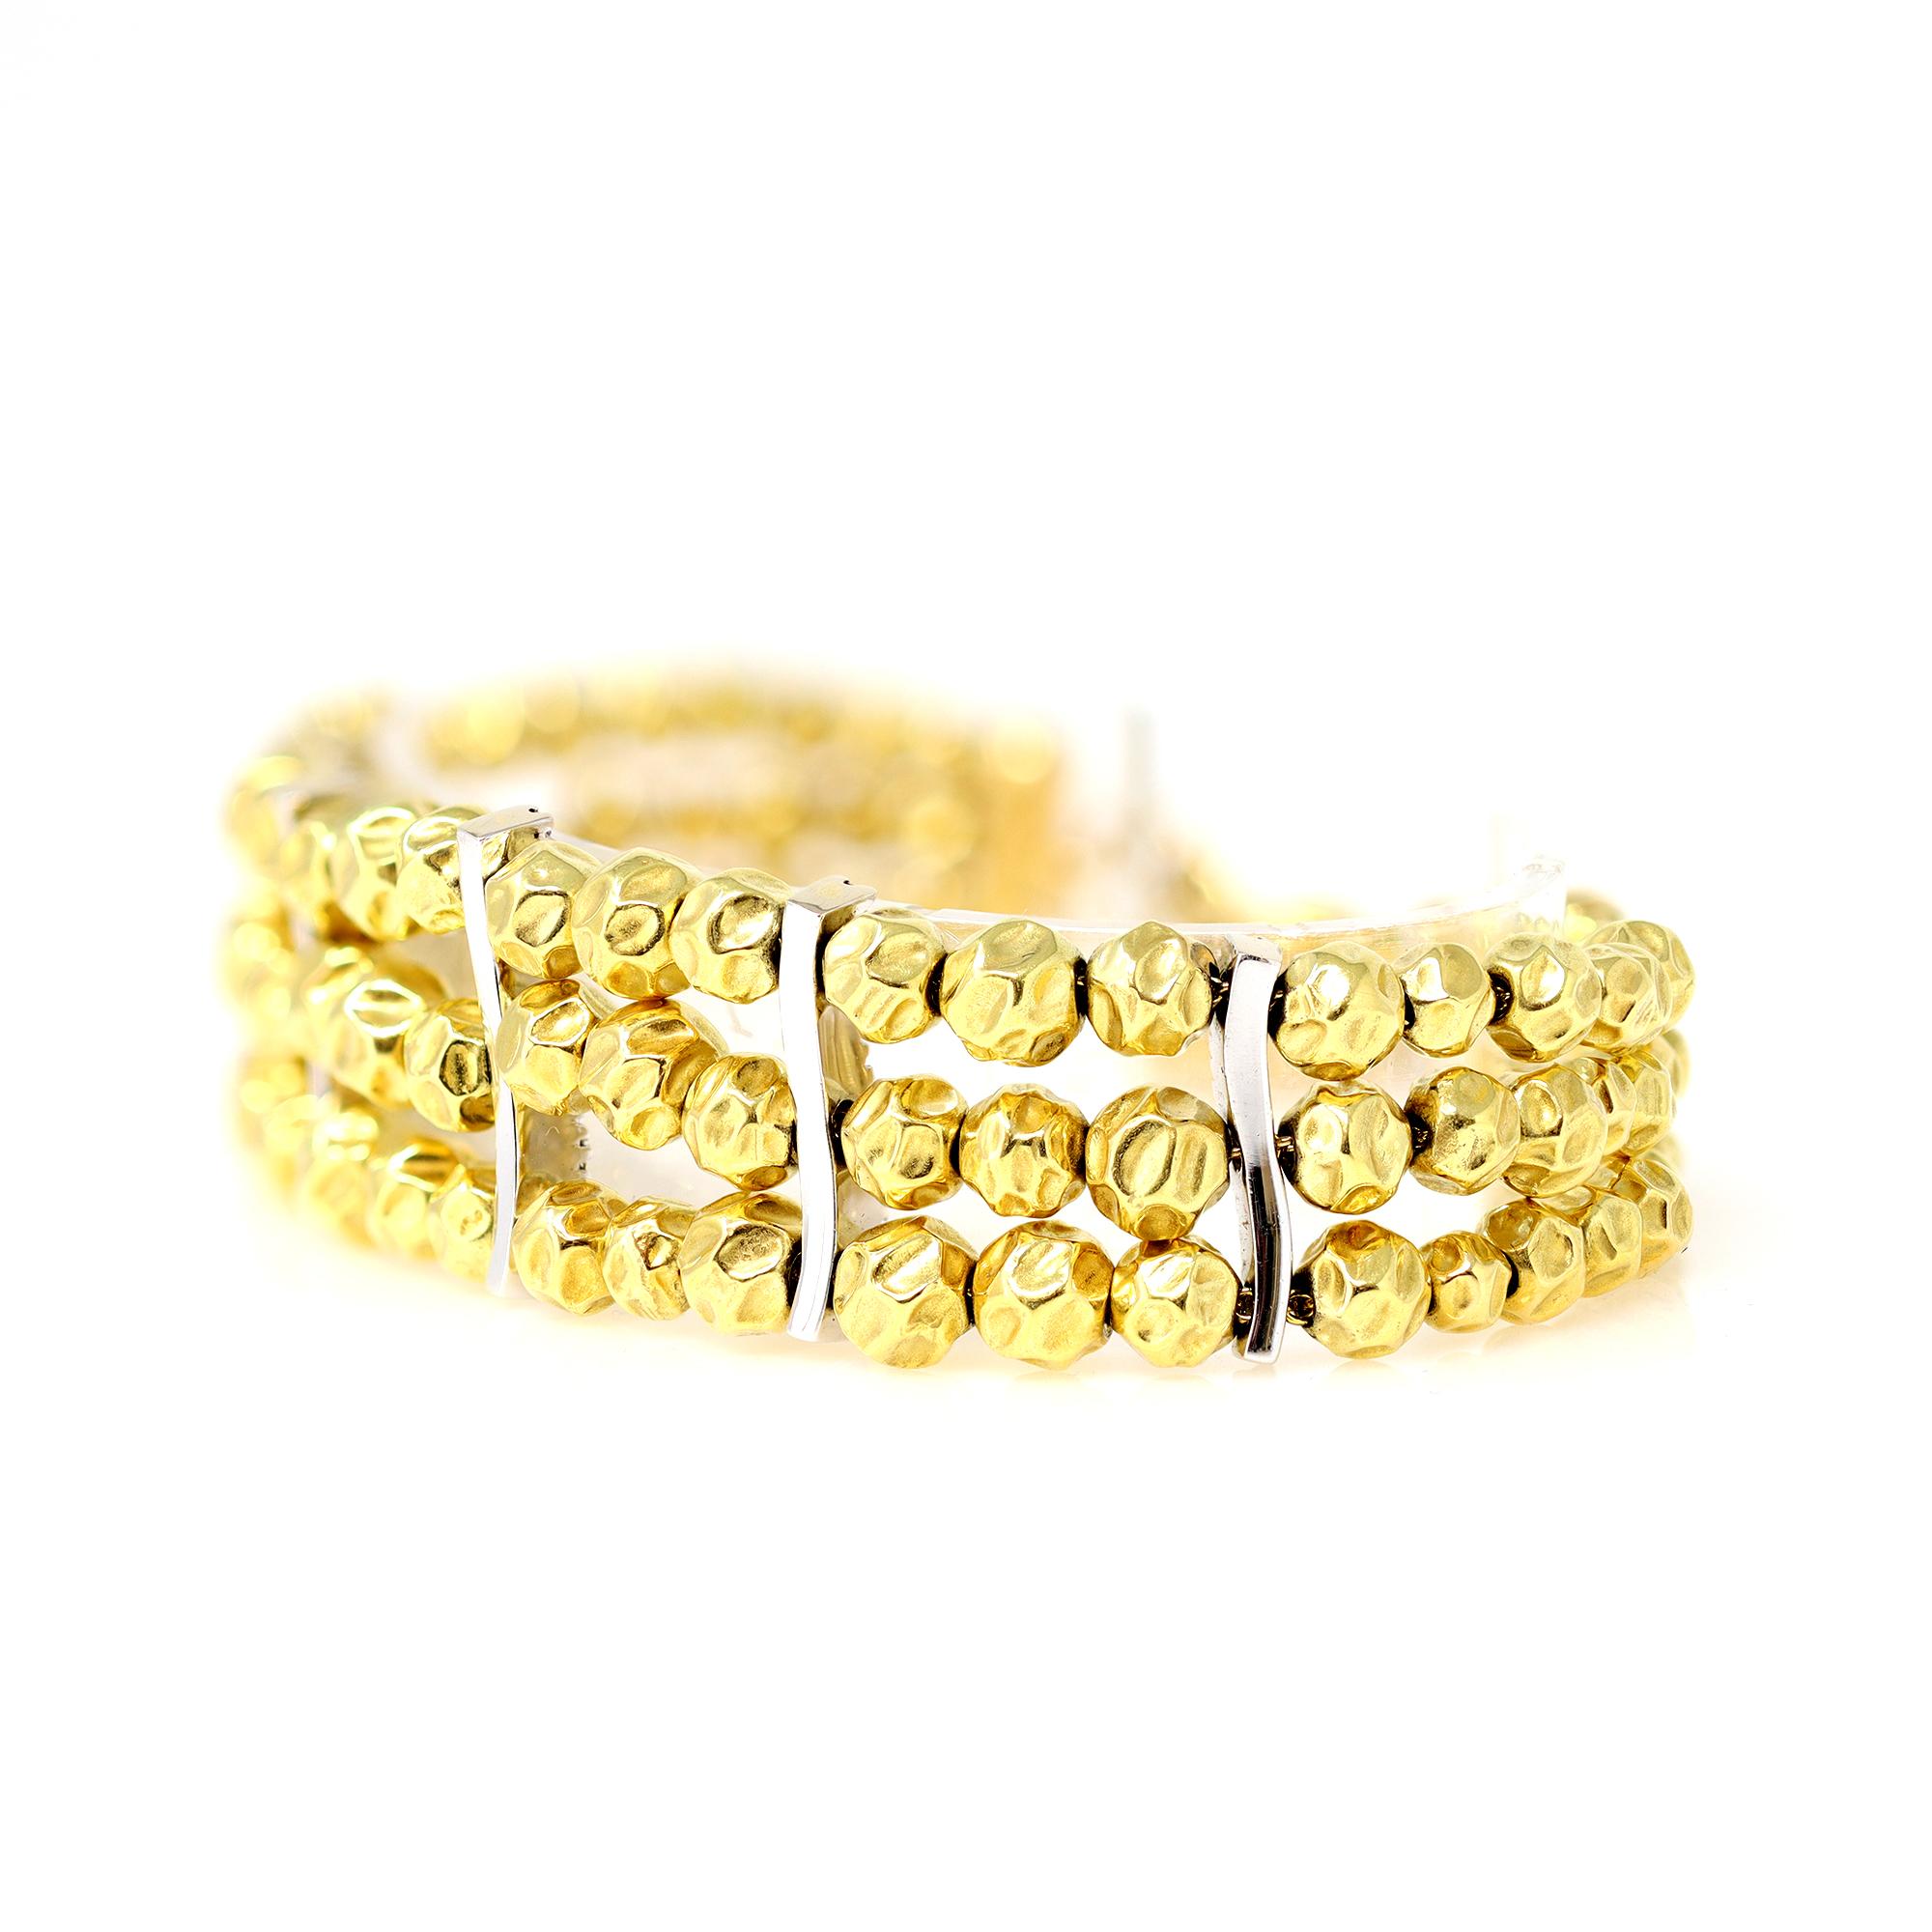 A modern gold beads bracelet circa 1990 featuring 3 lines of graduated hammered yellow gold beads, accented with diamond spacers and ending at the clasp with a small diamond ball charm. The bracelet is executed in 18 karat yellow and white gold and